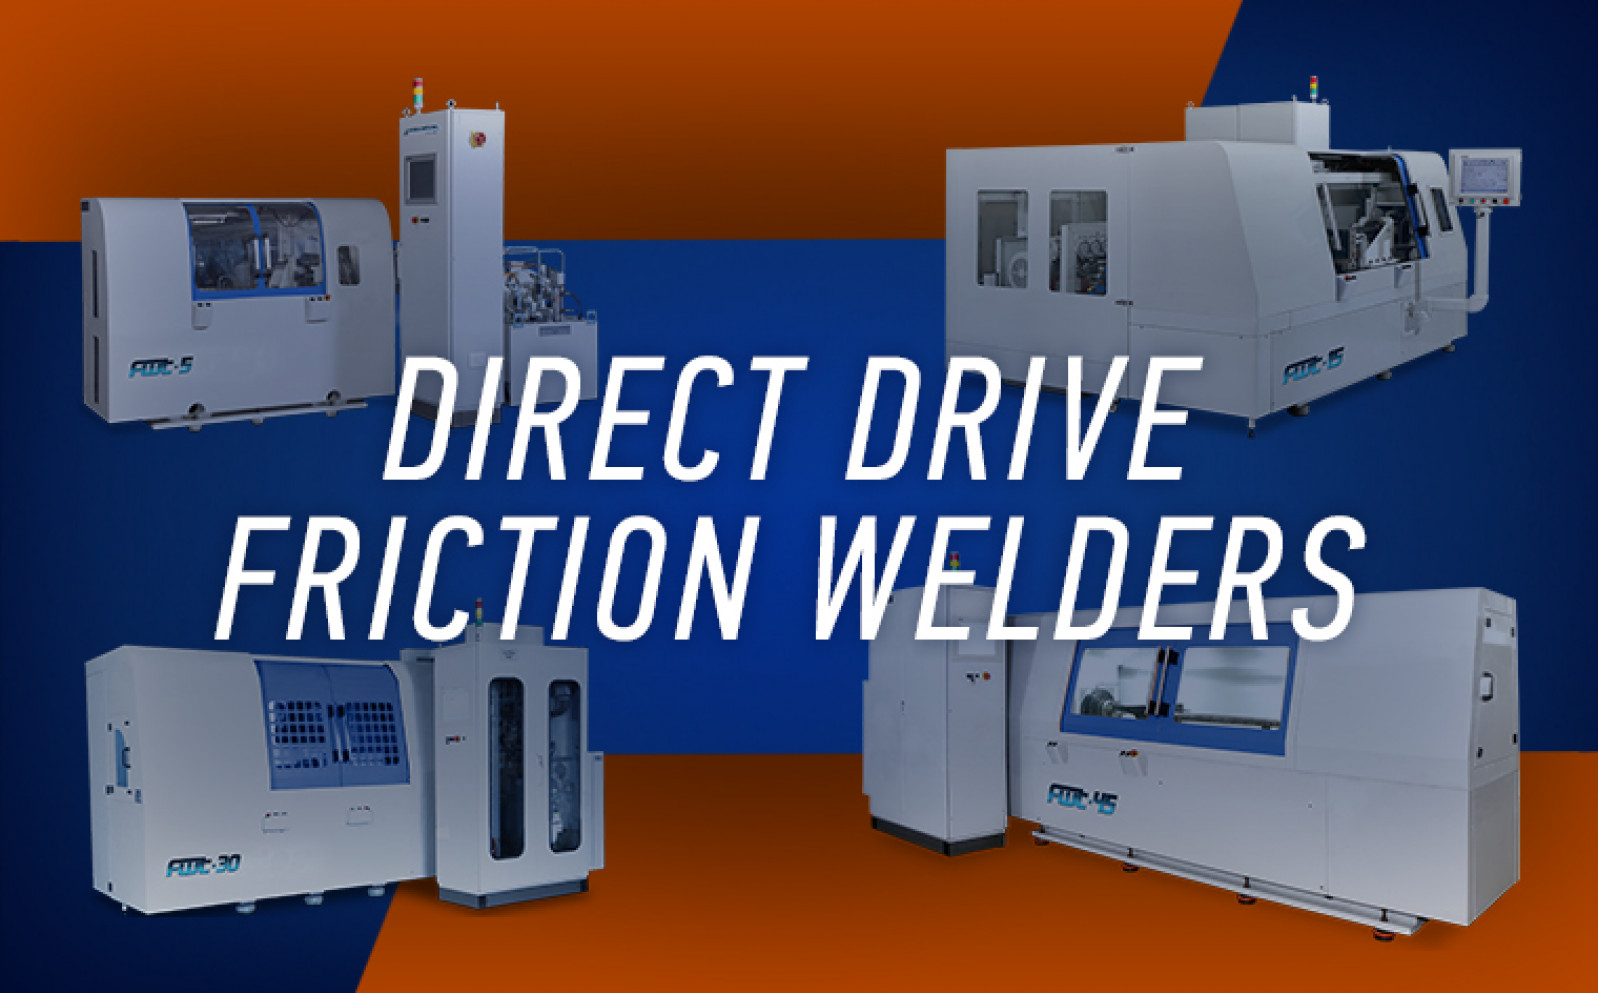 New Line of Direct Drive Friction Welders from MTI...